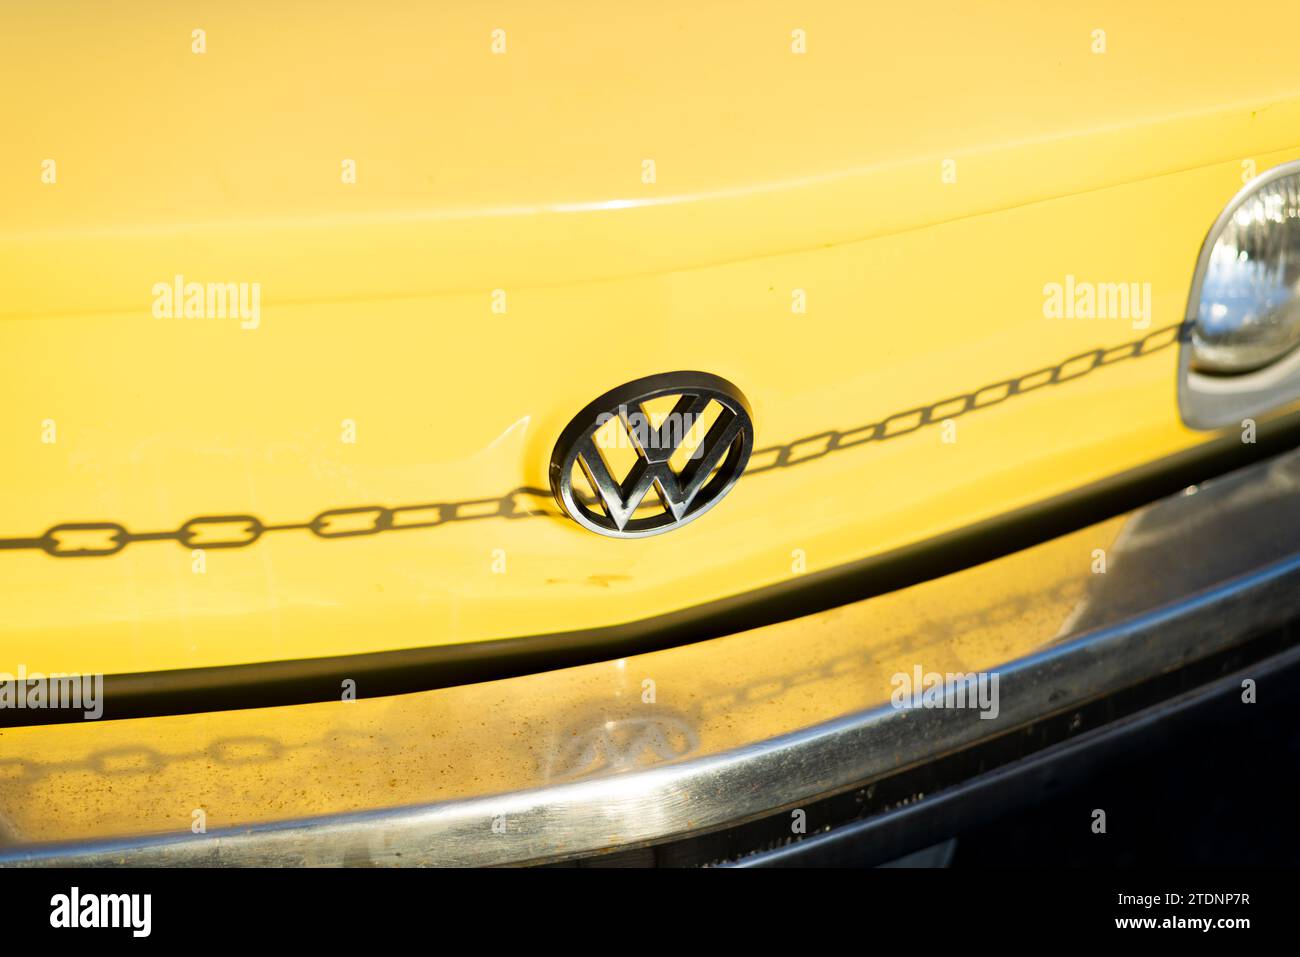 Salvador, Bahia, Brazil - December 02, 2023: Detail of the symbol of a Volkswagen car on display in the city of Salvador, Bahia. Stock Photo